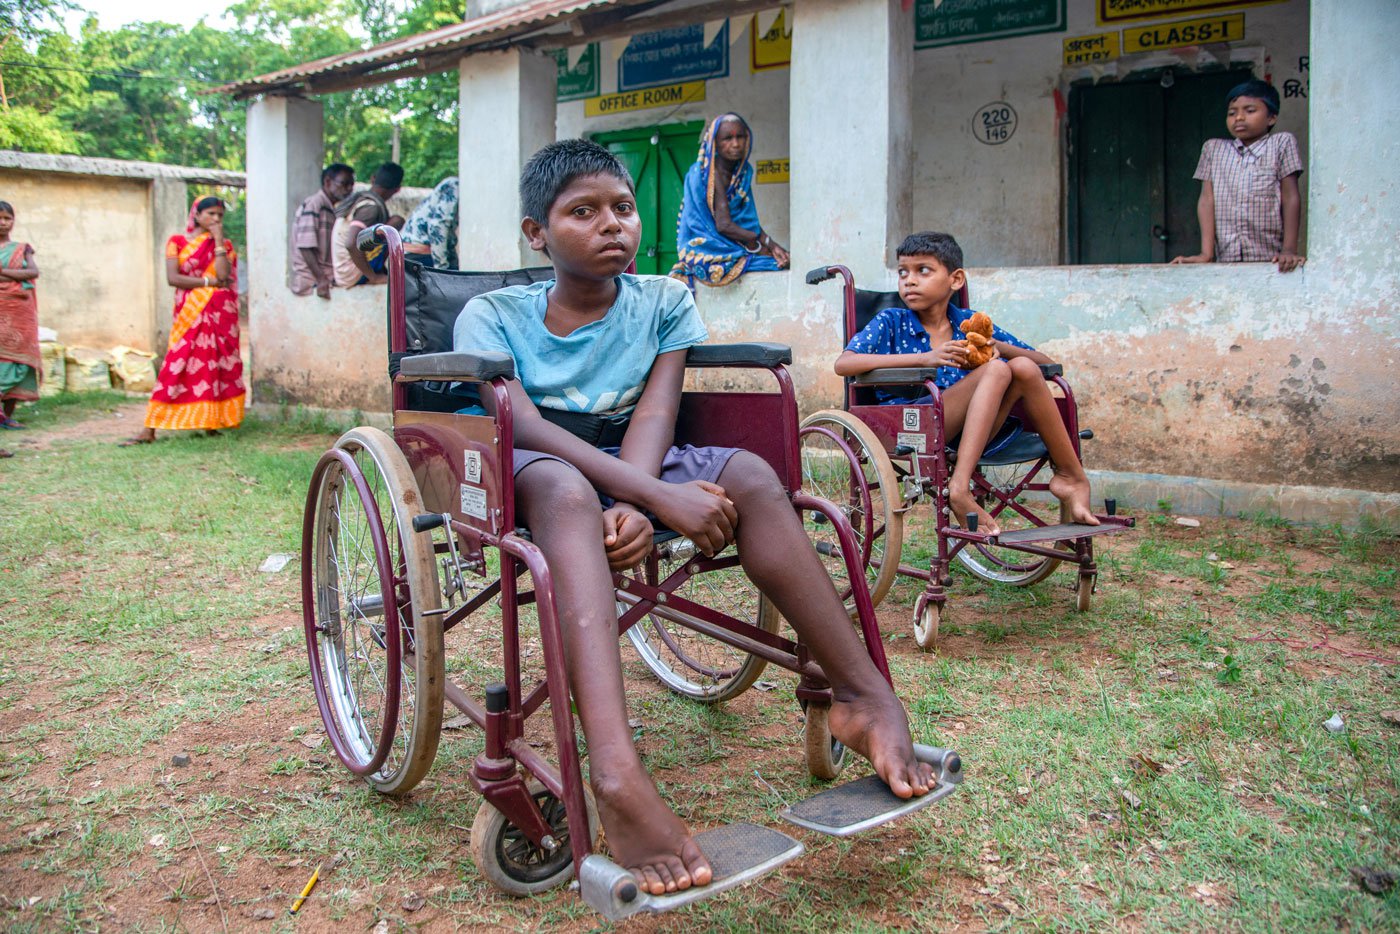 Parameswar Besra and Maheswar Beshra from Singdhui are in wheelchairs. The brothers were born healthy but lost their ability to walk over time. They could not get the help they needed as healthcare facilities are far, and the family's precarious financial condition did not allow it